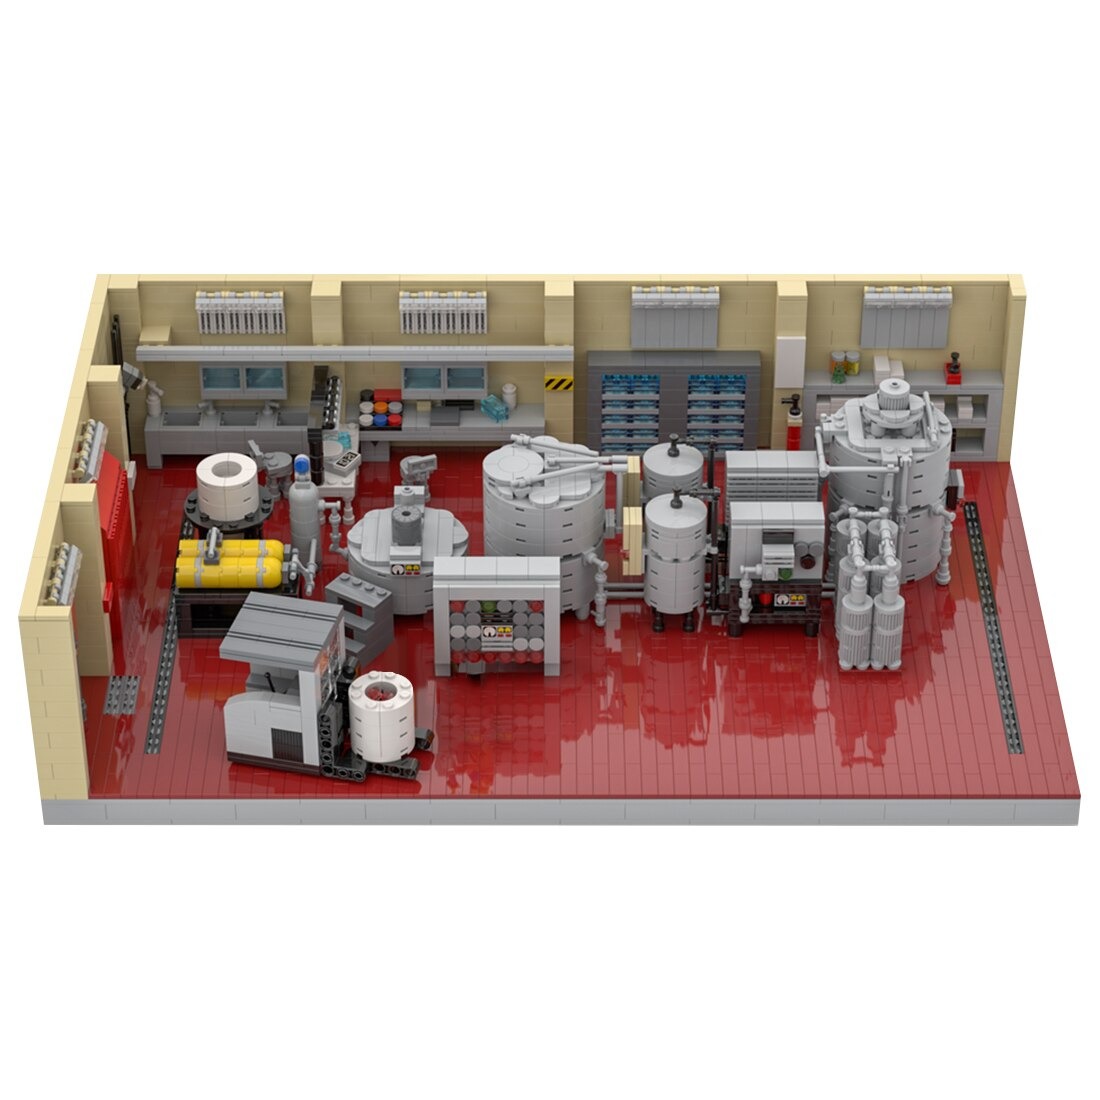 Breaking Bad Superlab CREATOR MOC-49863 by YCBricks WITH 2885 PIECES